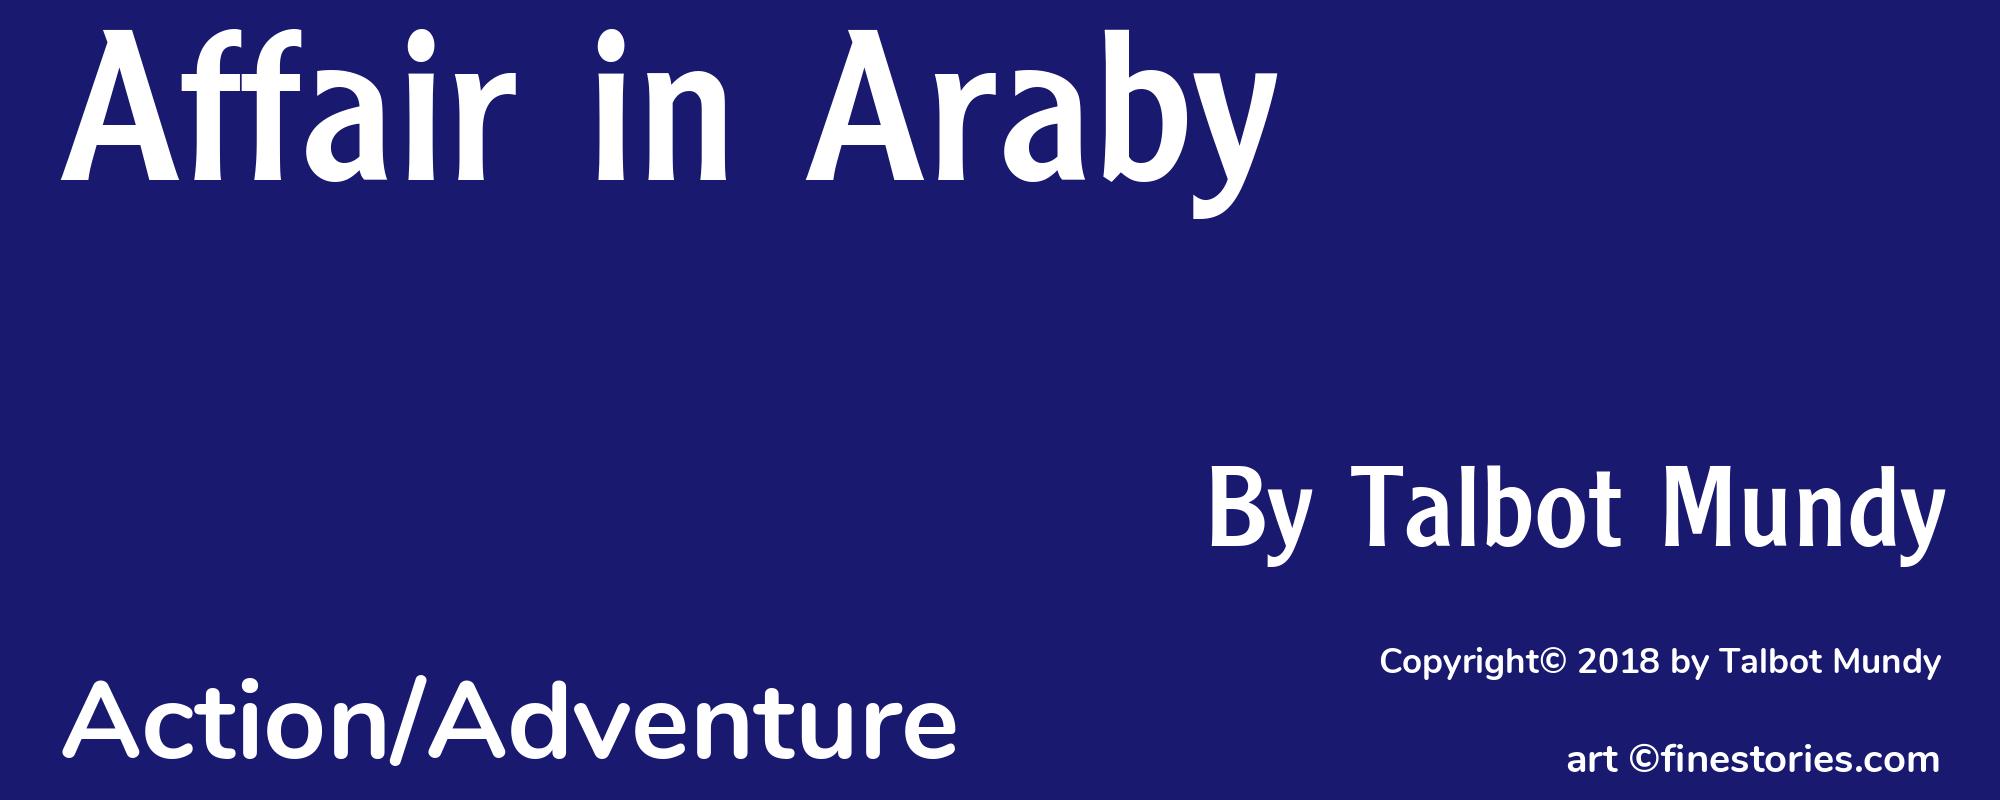 Affair in Araby - Cover